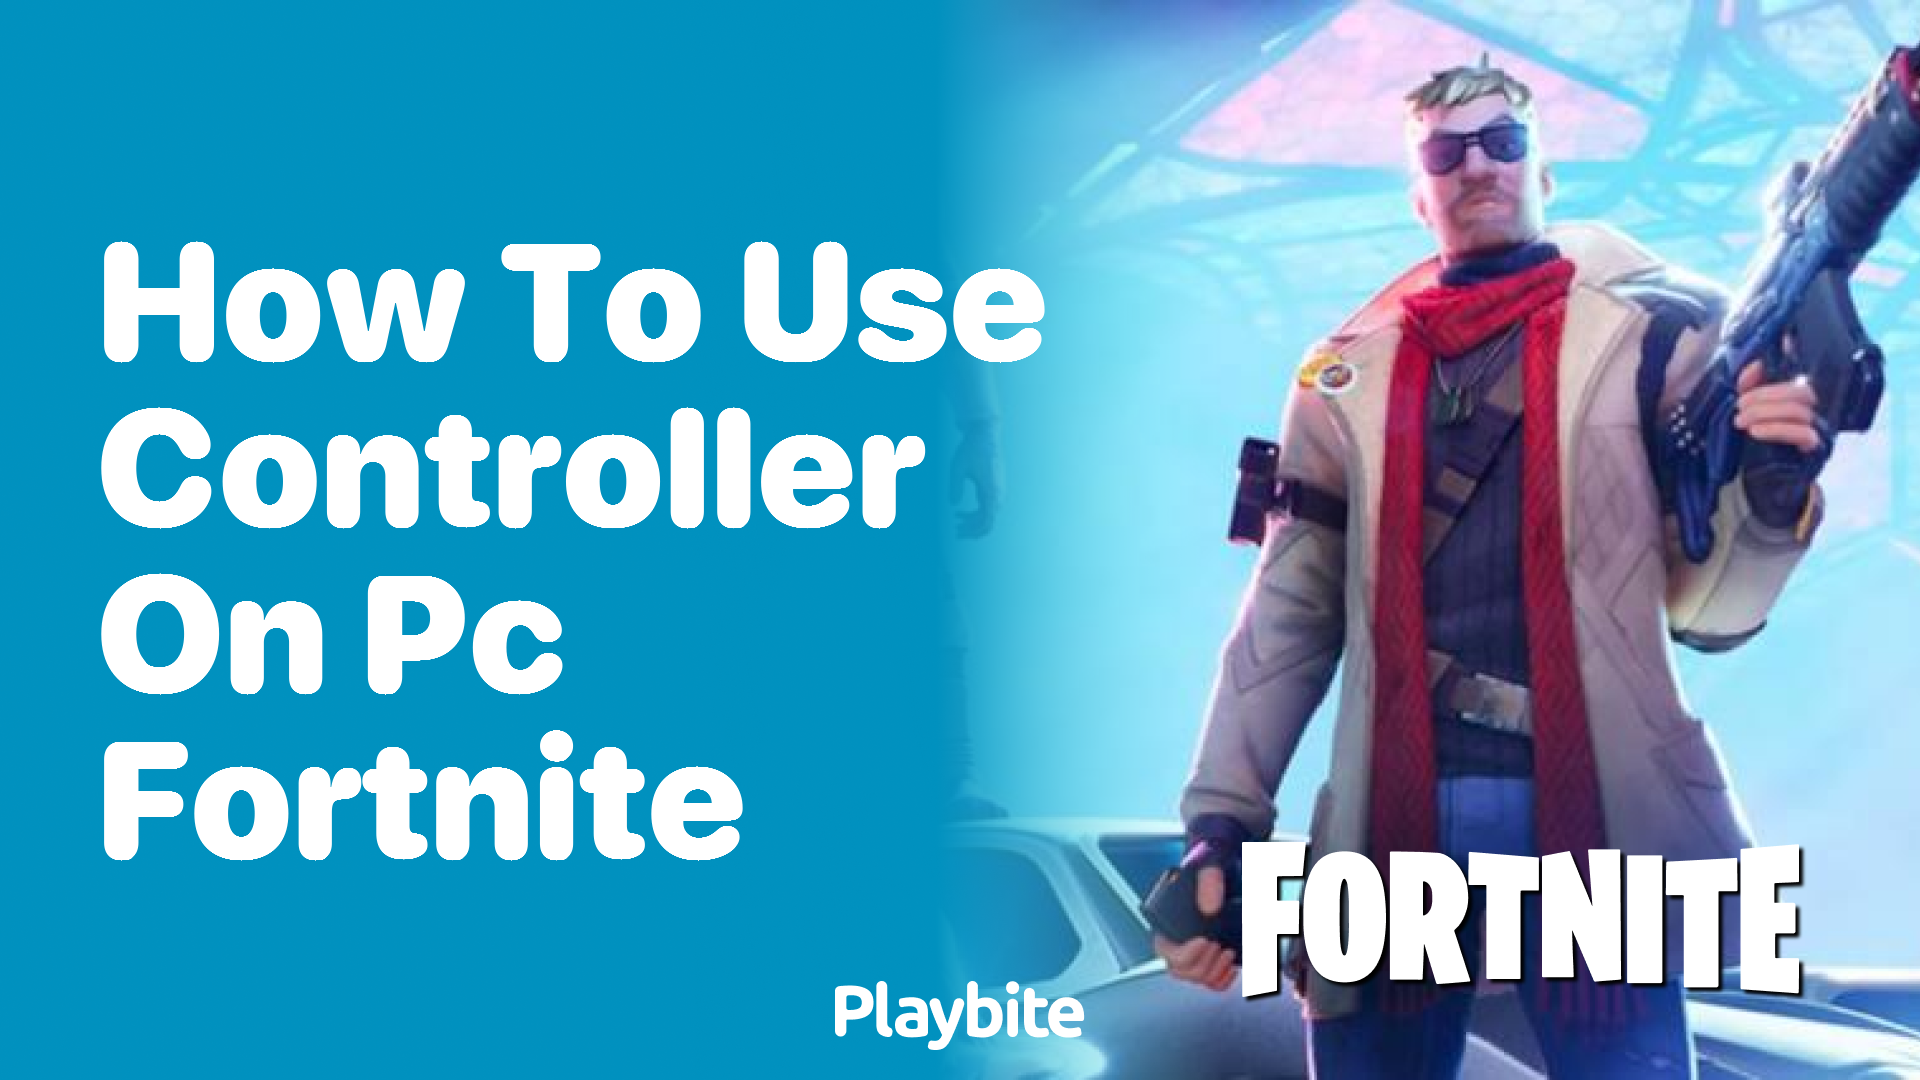 How to Use a Controller on PC for Fortnite: A Quick Guide